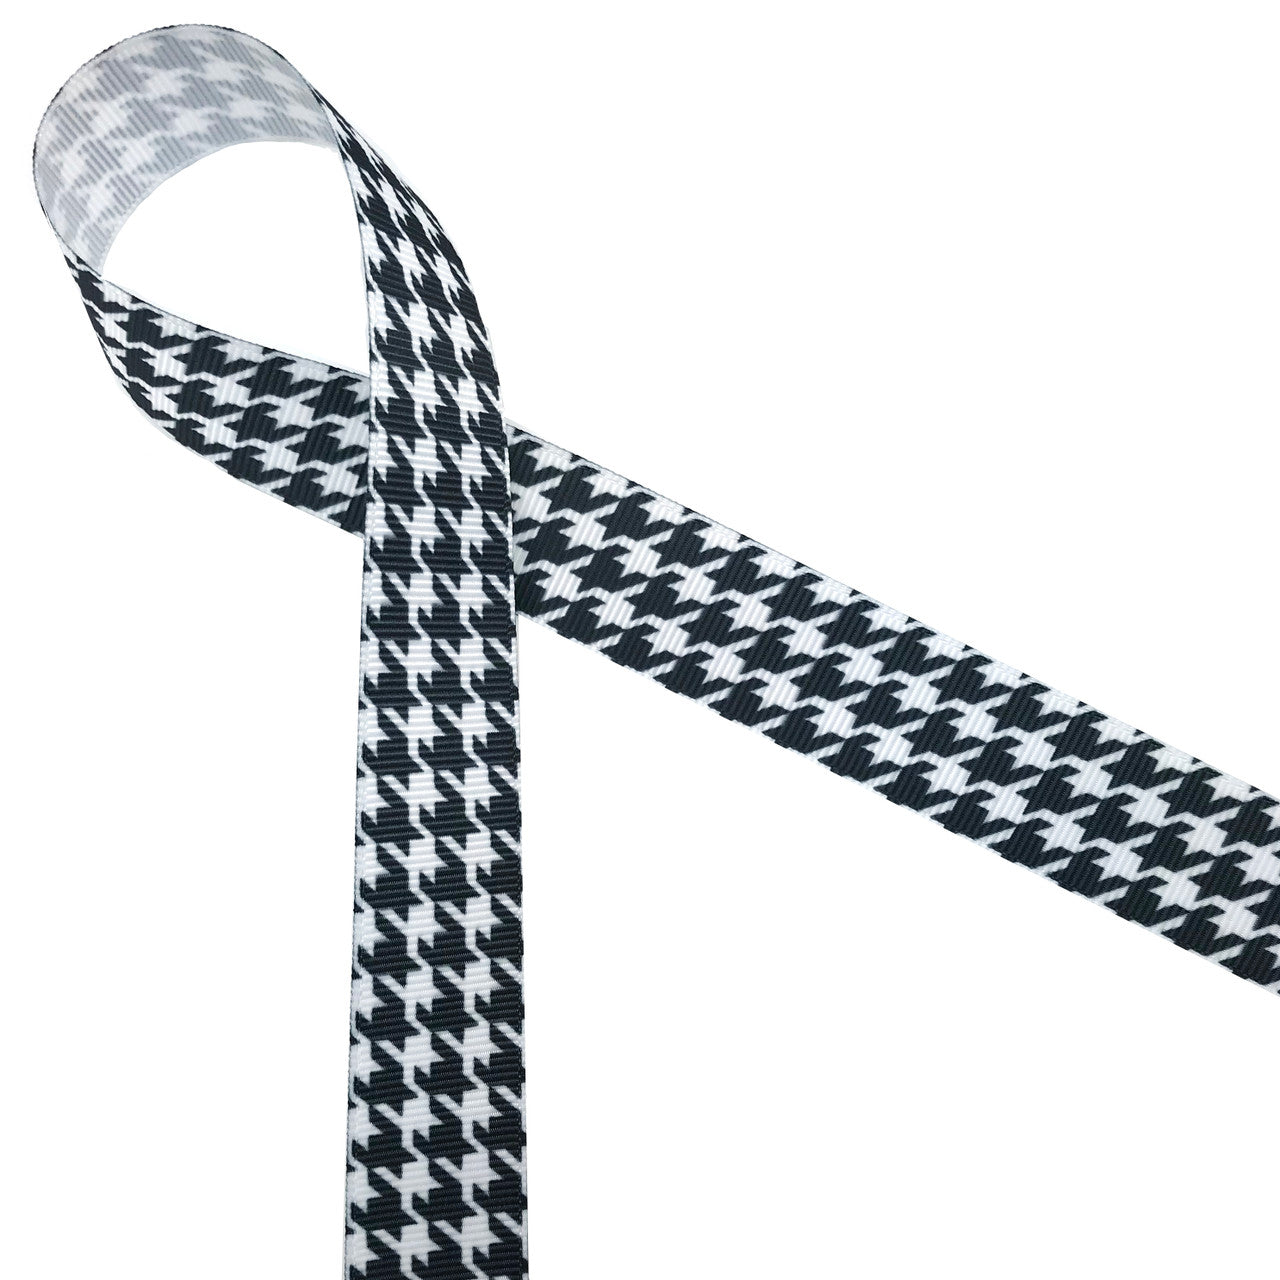 Black and white houndstooth check printed on 1.5" white grosgrain ribbon is a classic design for Holiday gift wrap, Father's day and Alabama football. All our ribbons are designed and printed in the USA